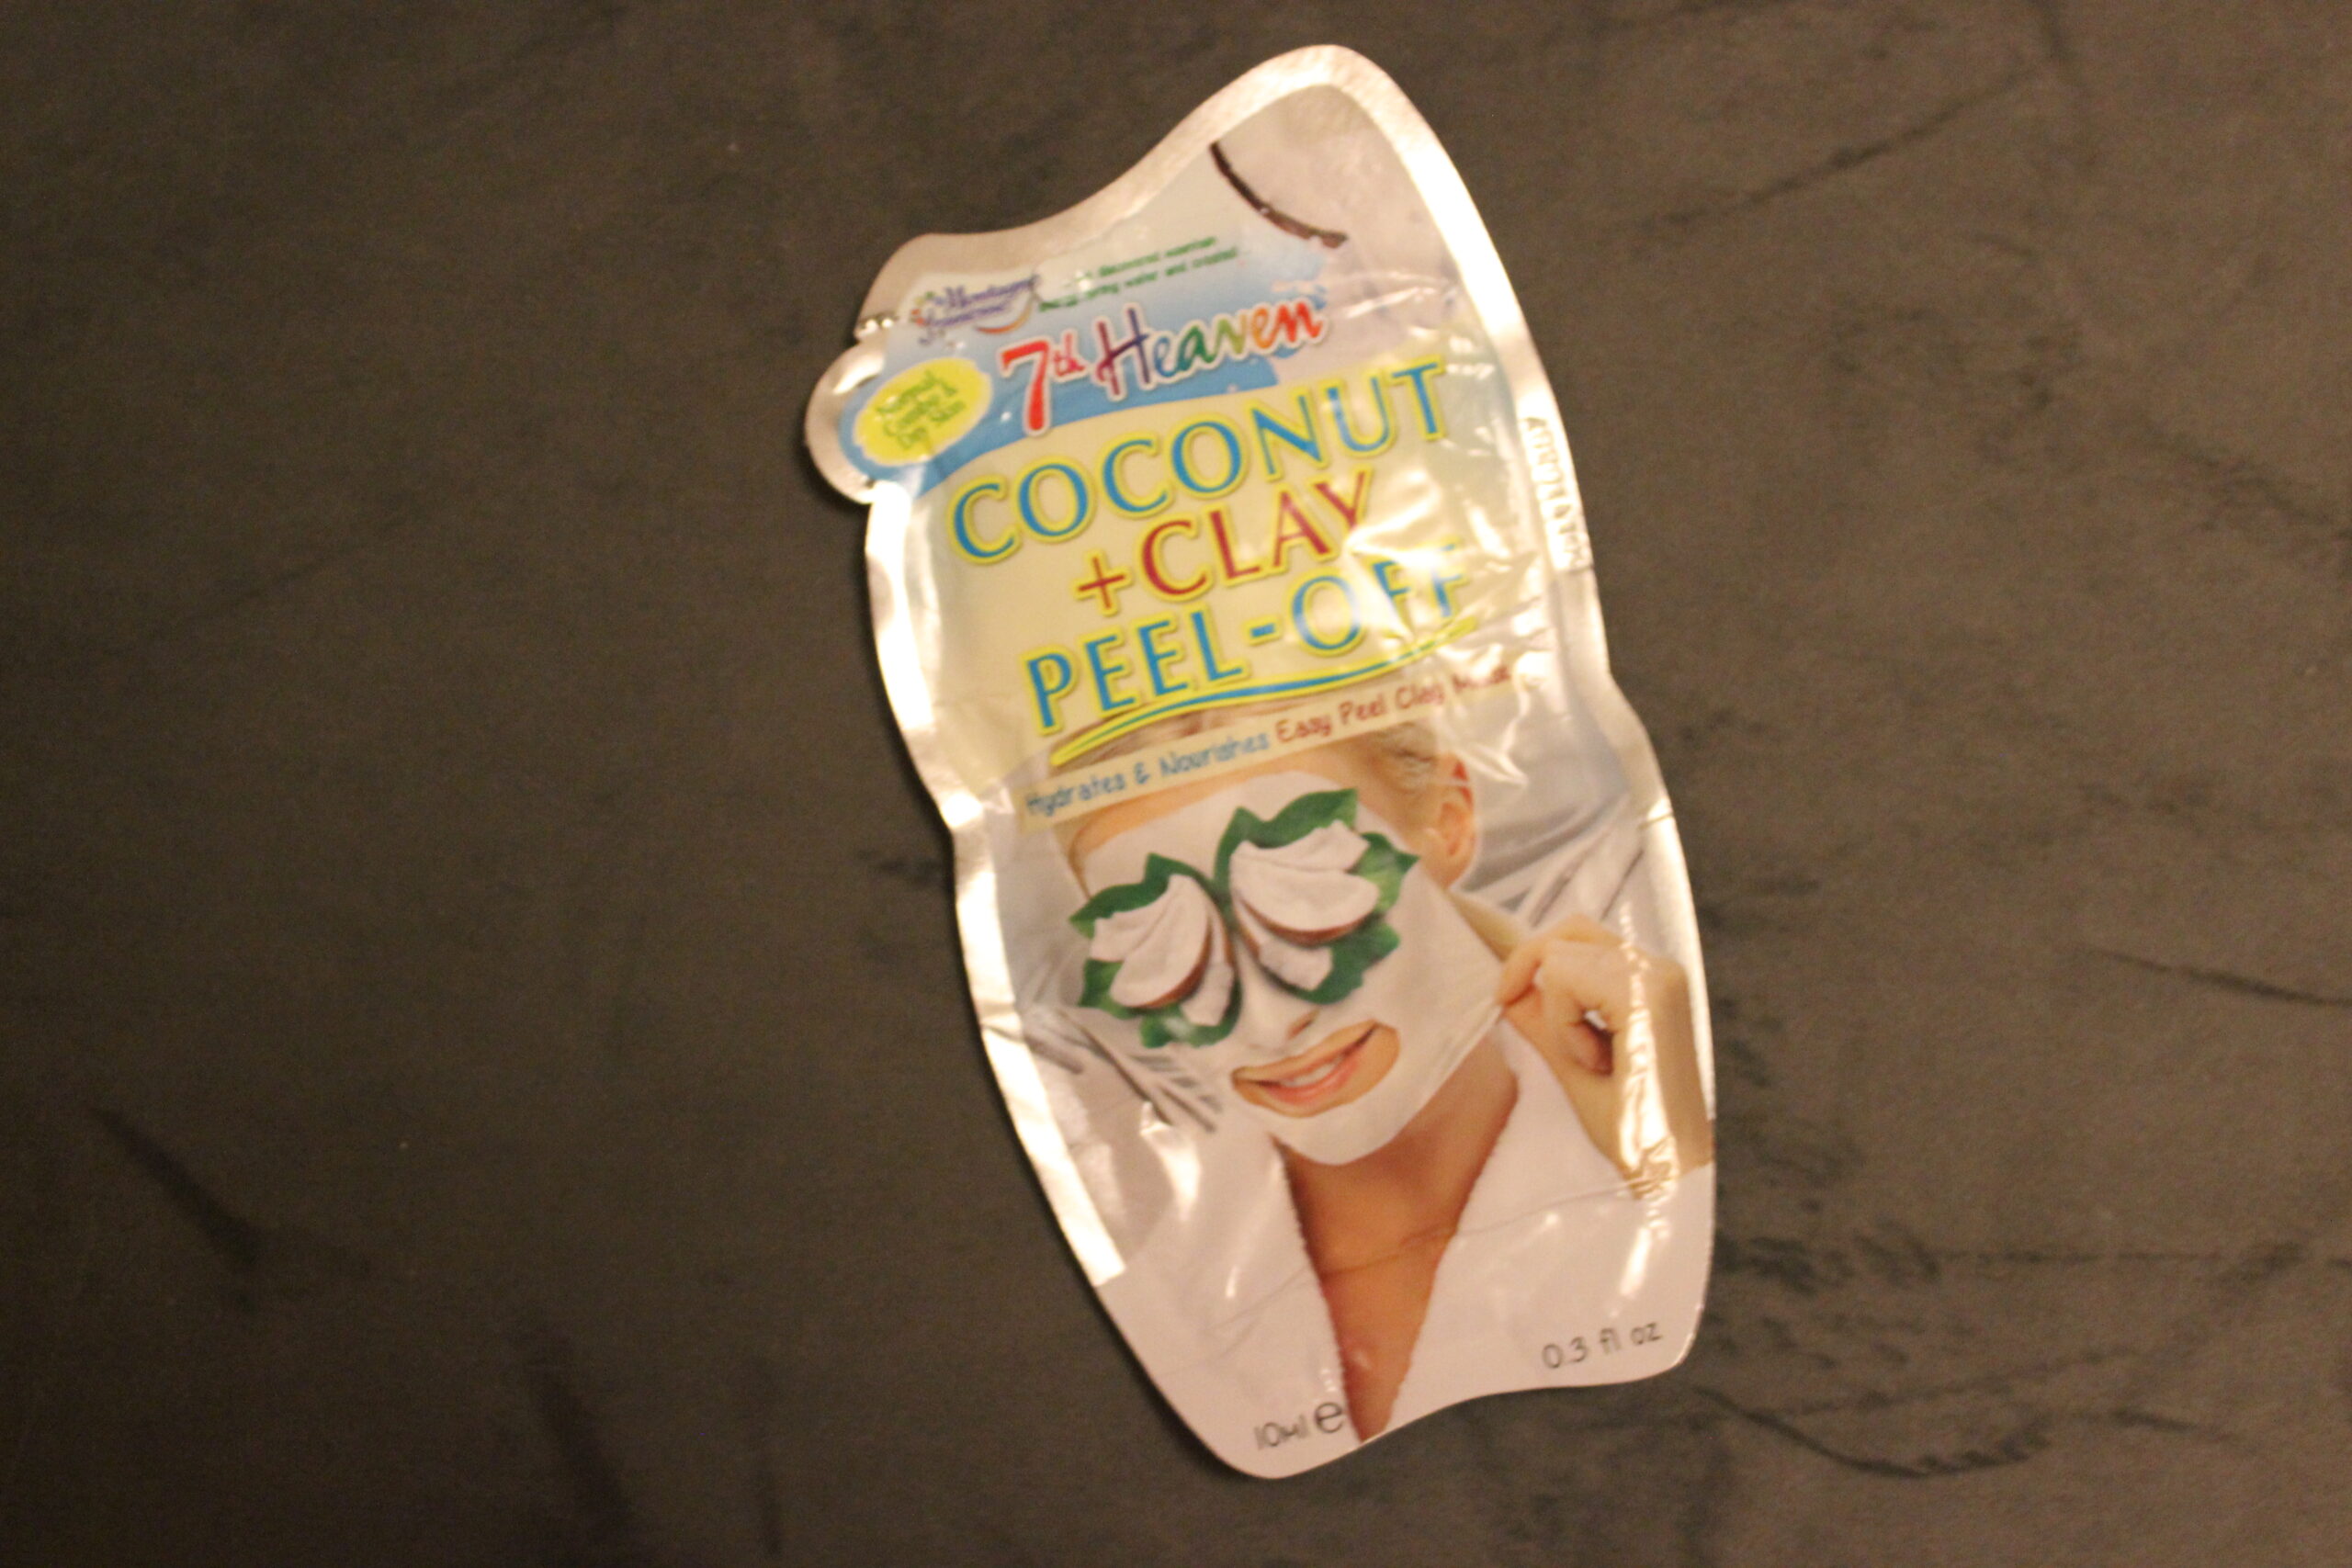 Coconut + Clay Peel Off Mask from 7th Heaven